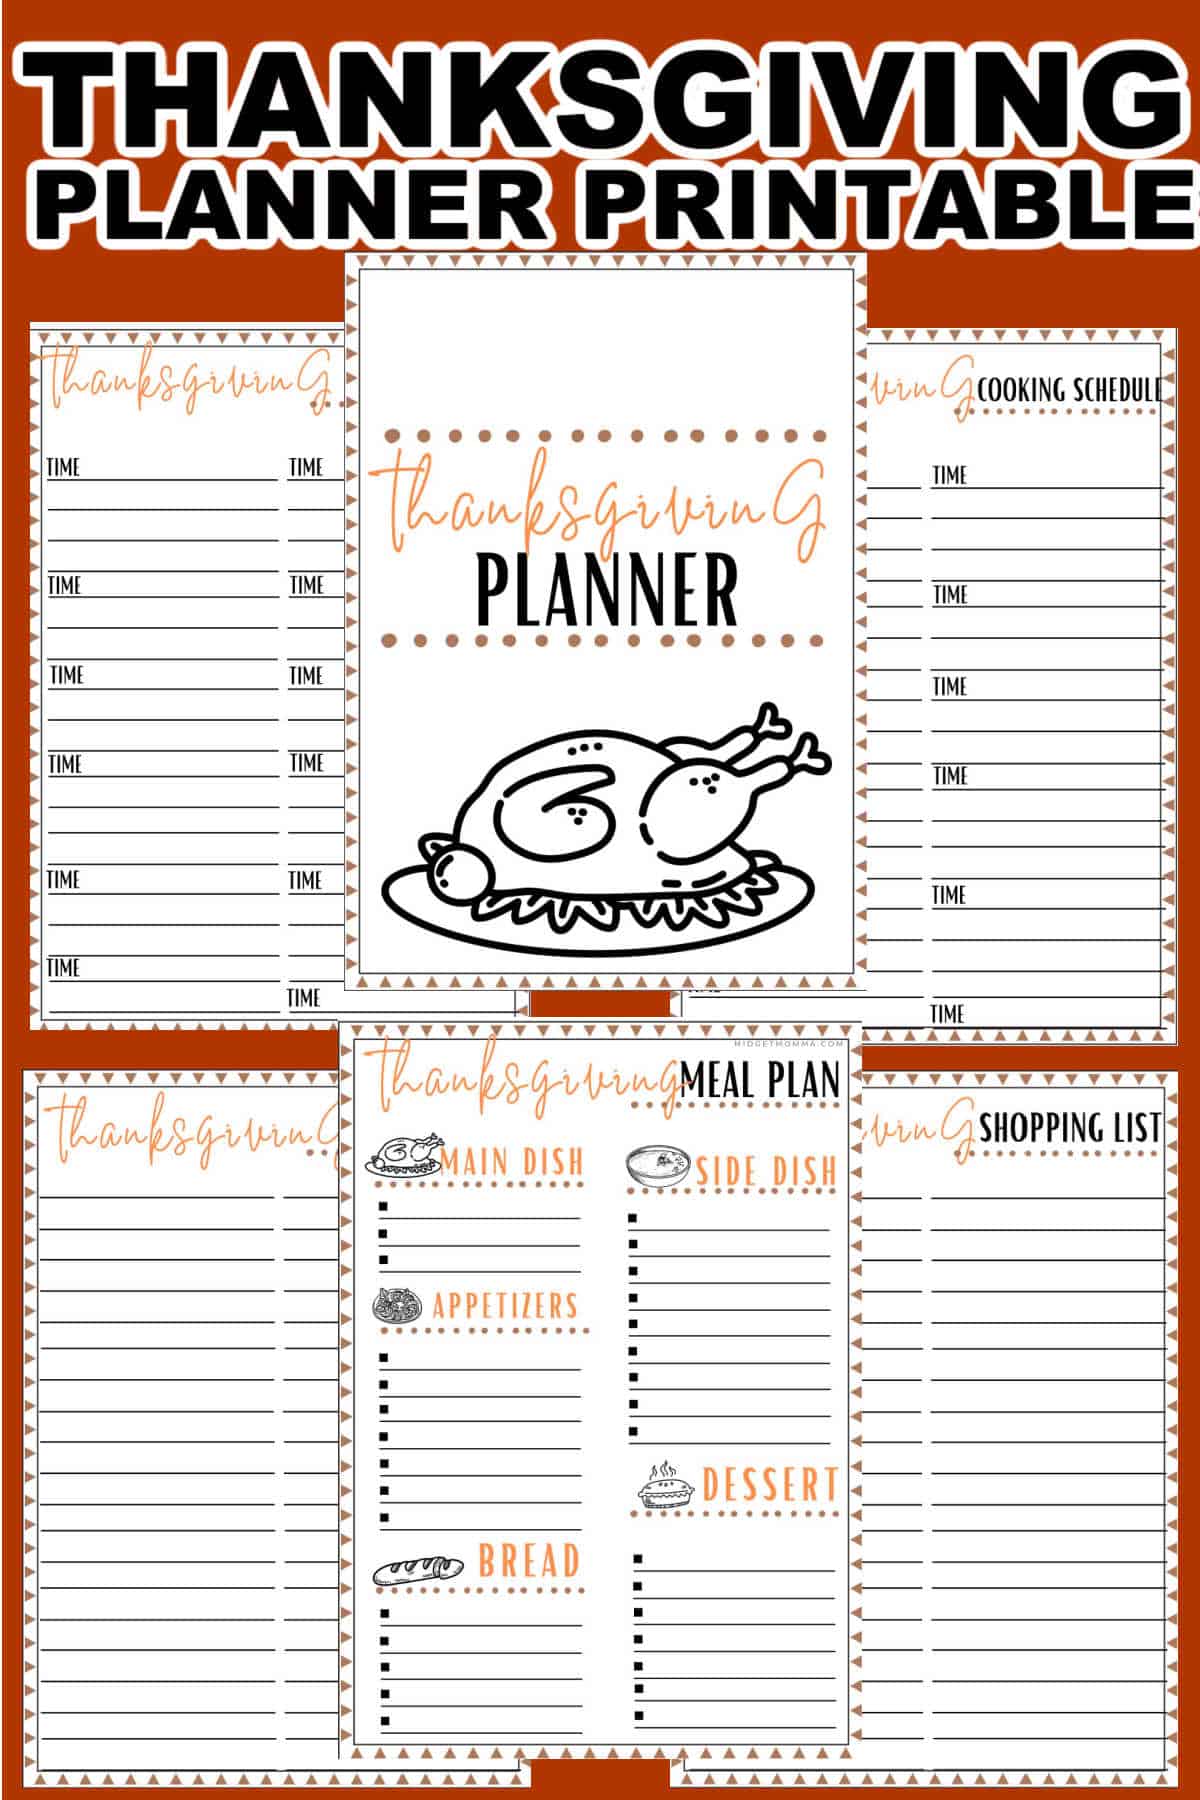 Thanksgiving meal planner printable